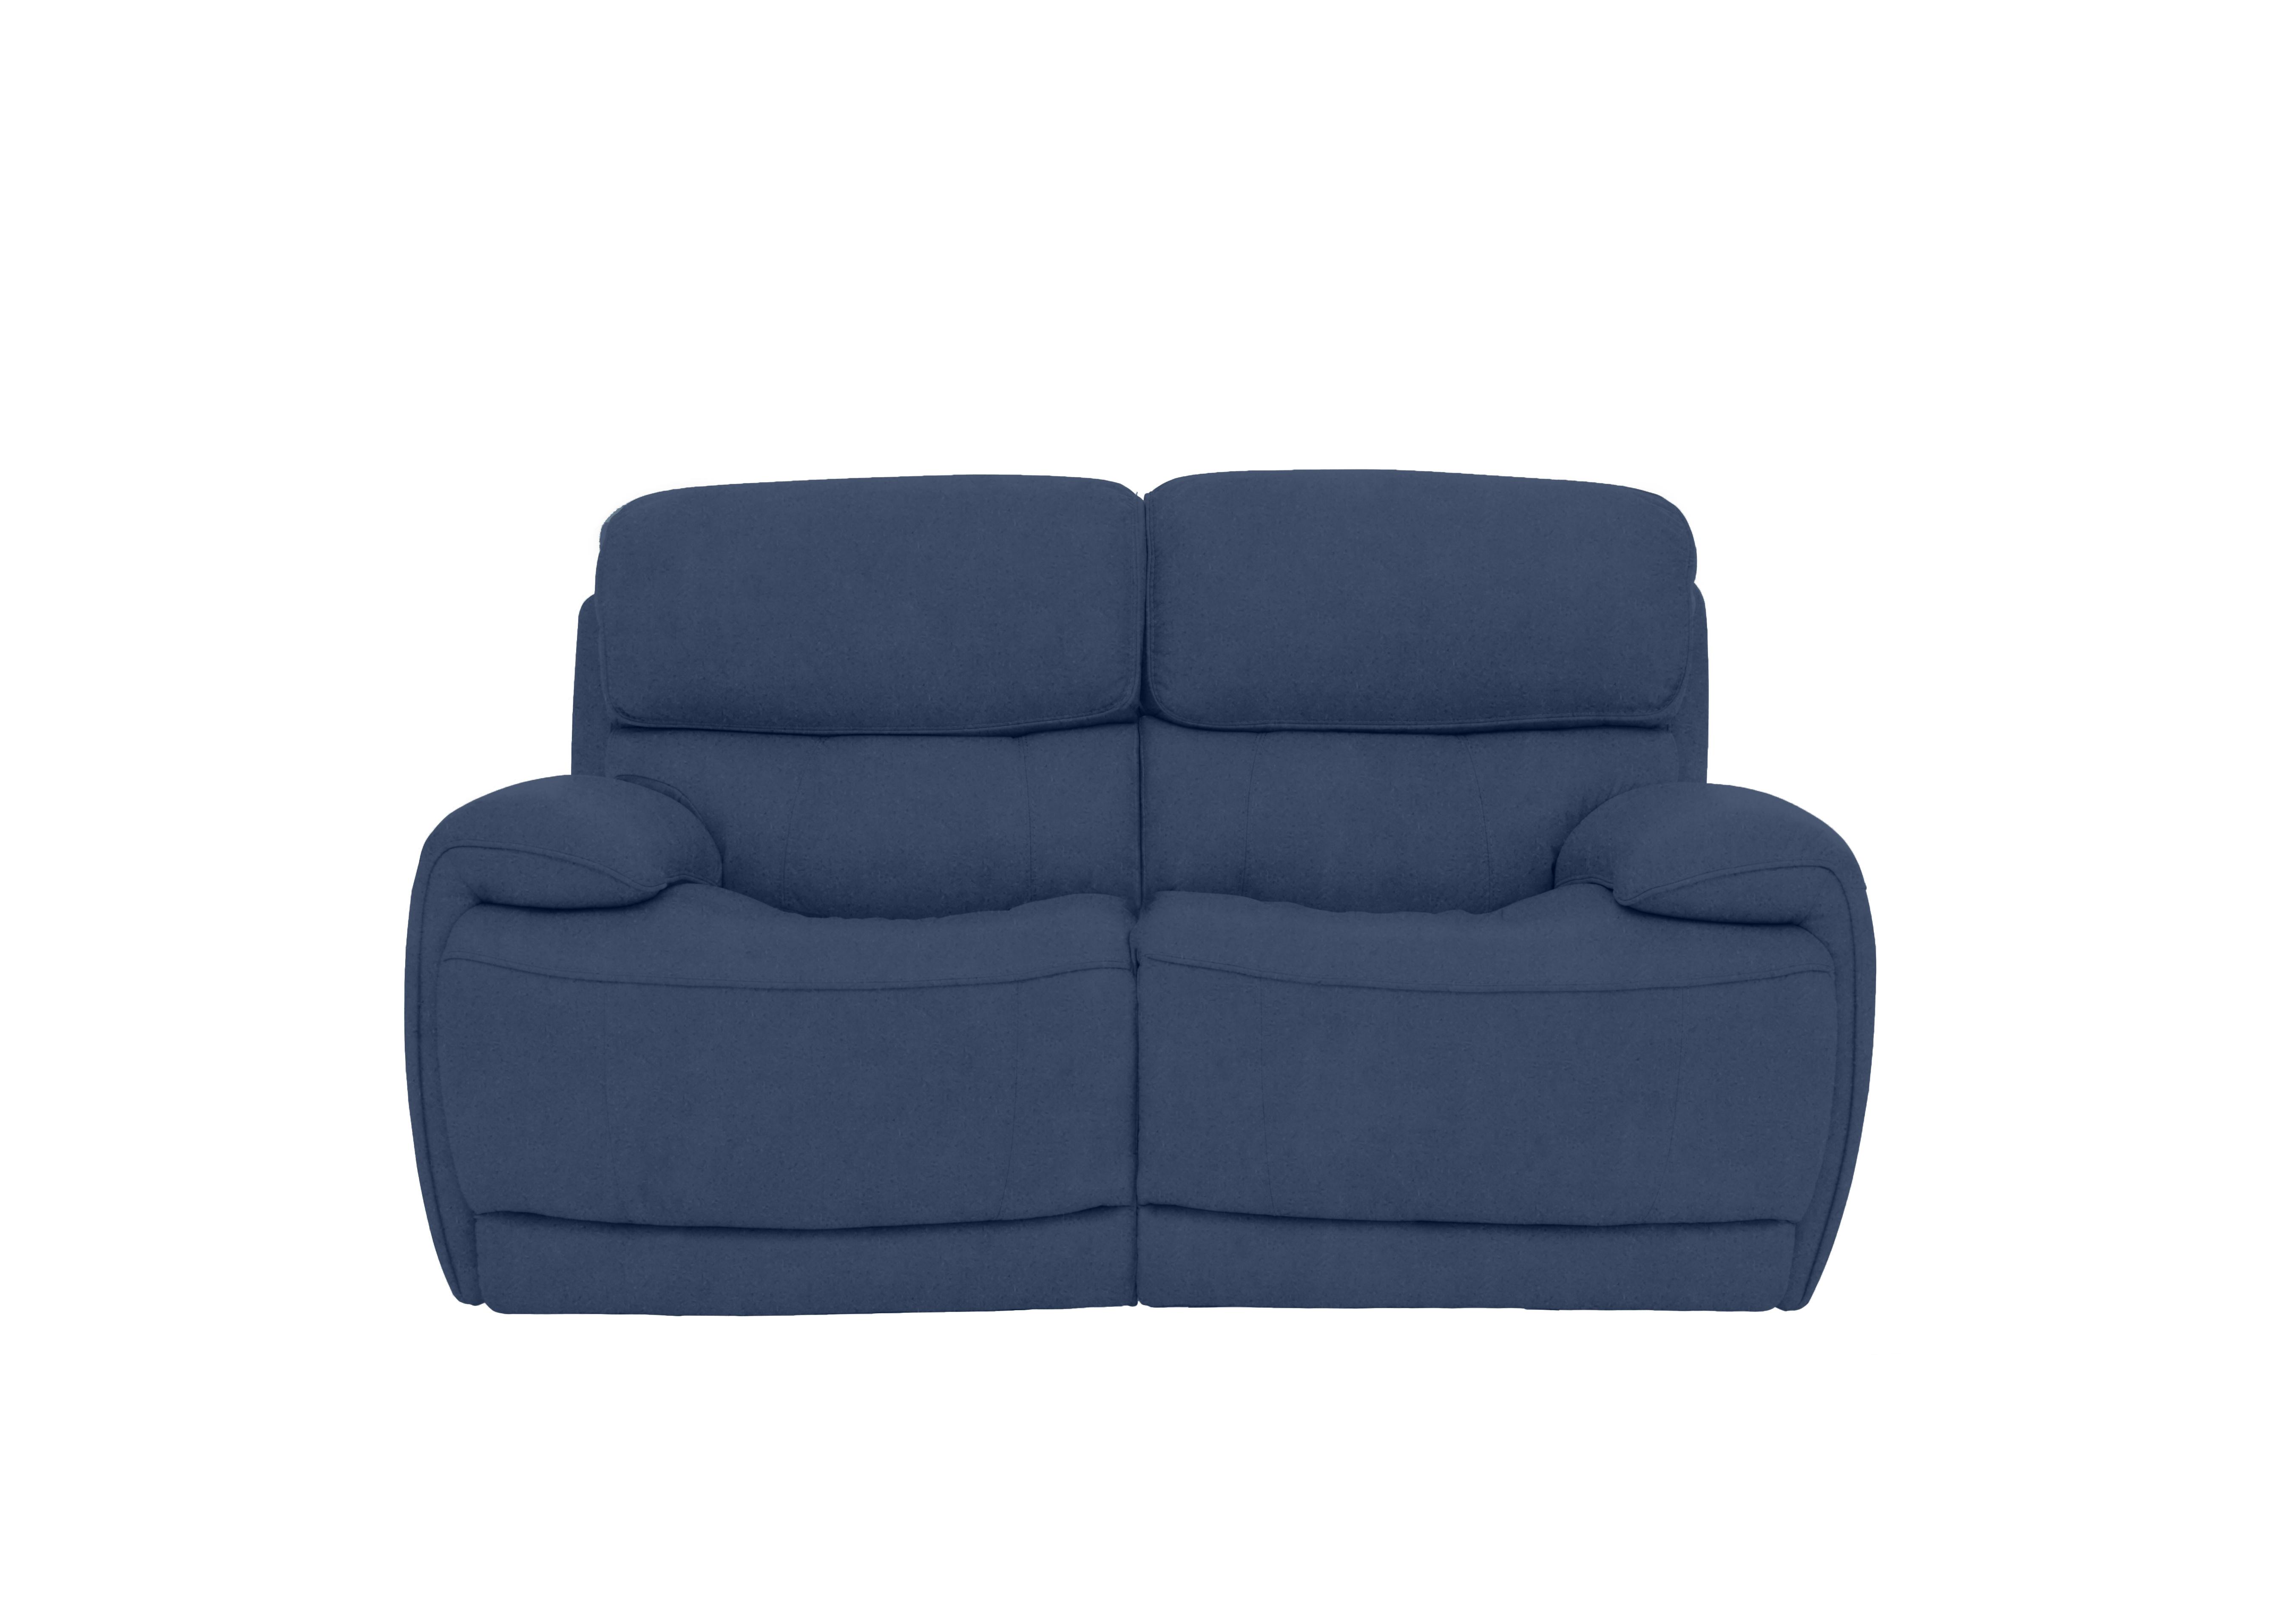 Rocco 2 Seater Fabric Power Rocker Sofa with Power Headrests in Bfa-Blj-R10 Blue on Furniture Village